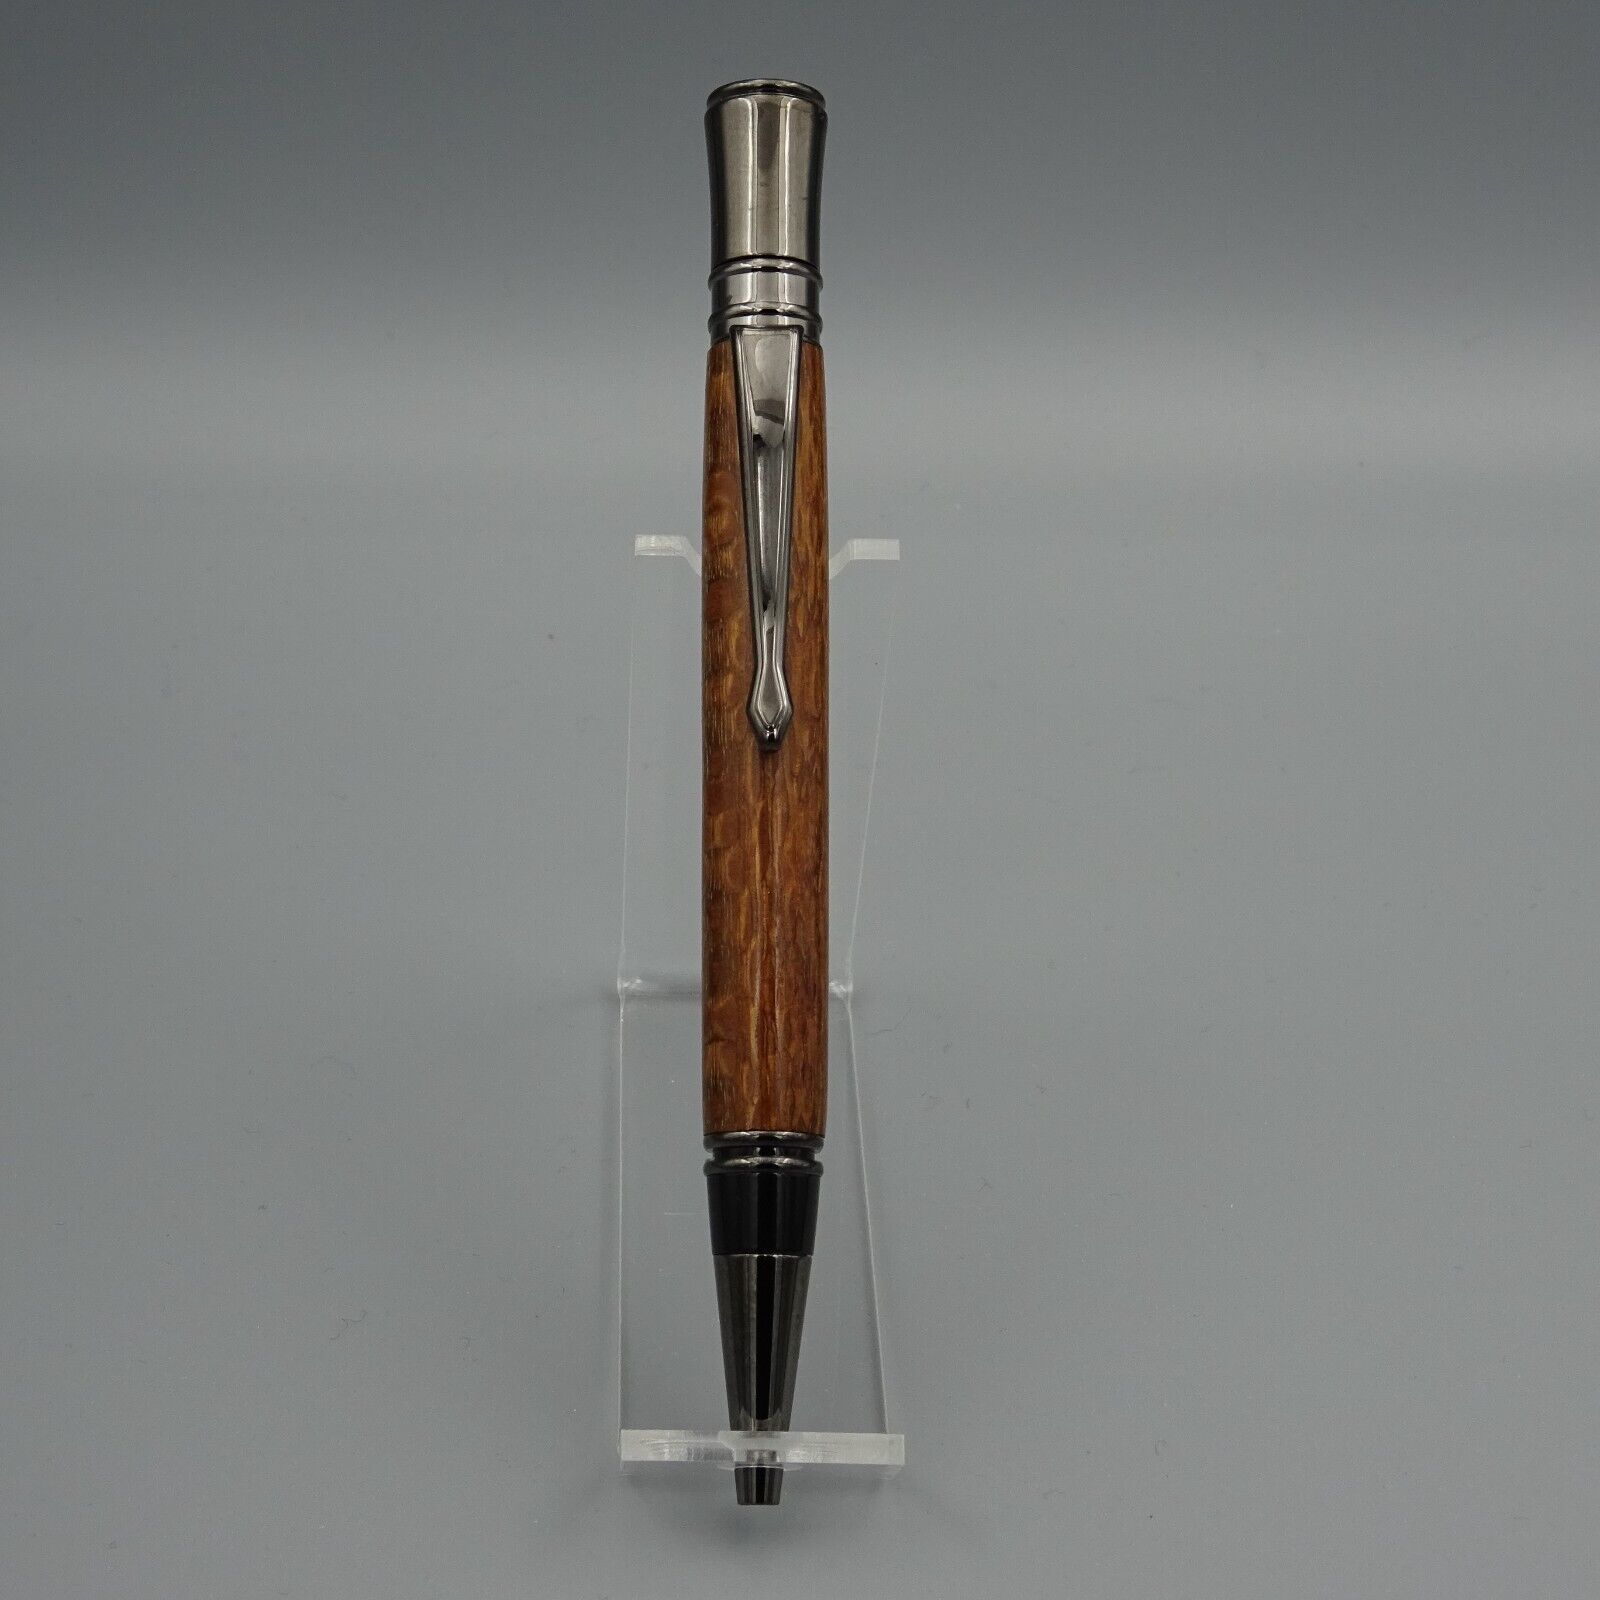 HANDCRAFTED EXECUTIVE TWIST PEN with LACEWOOD BARREL and GUN METAL TRIM